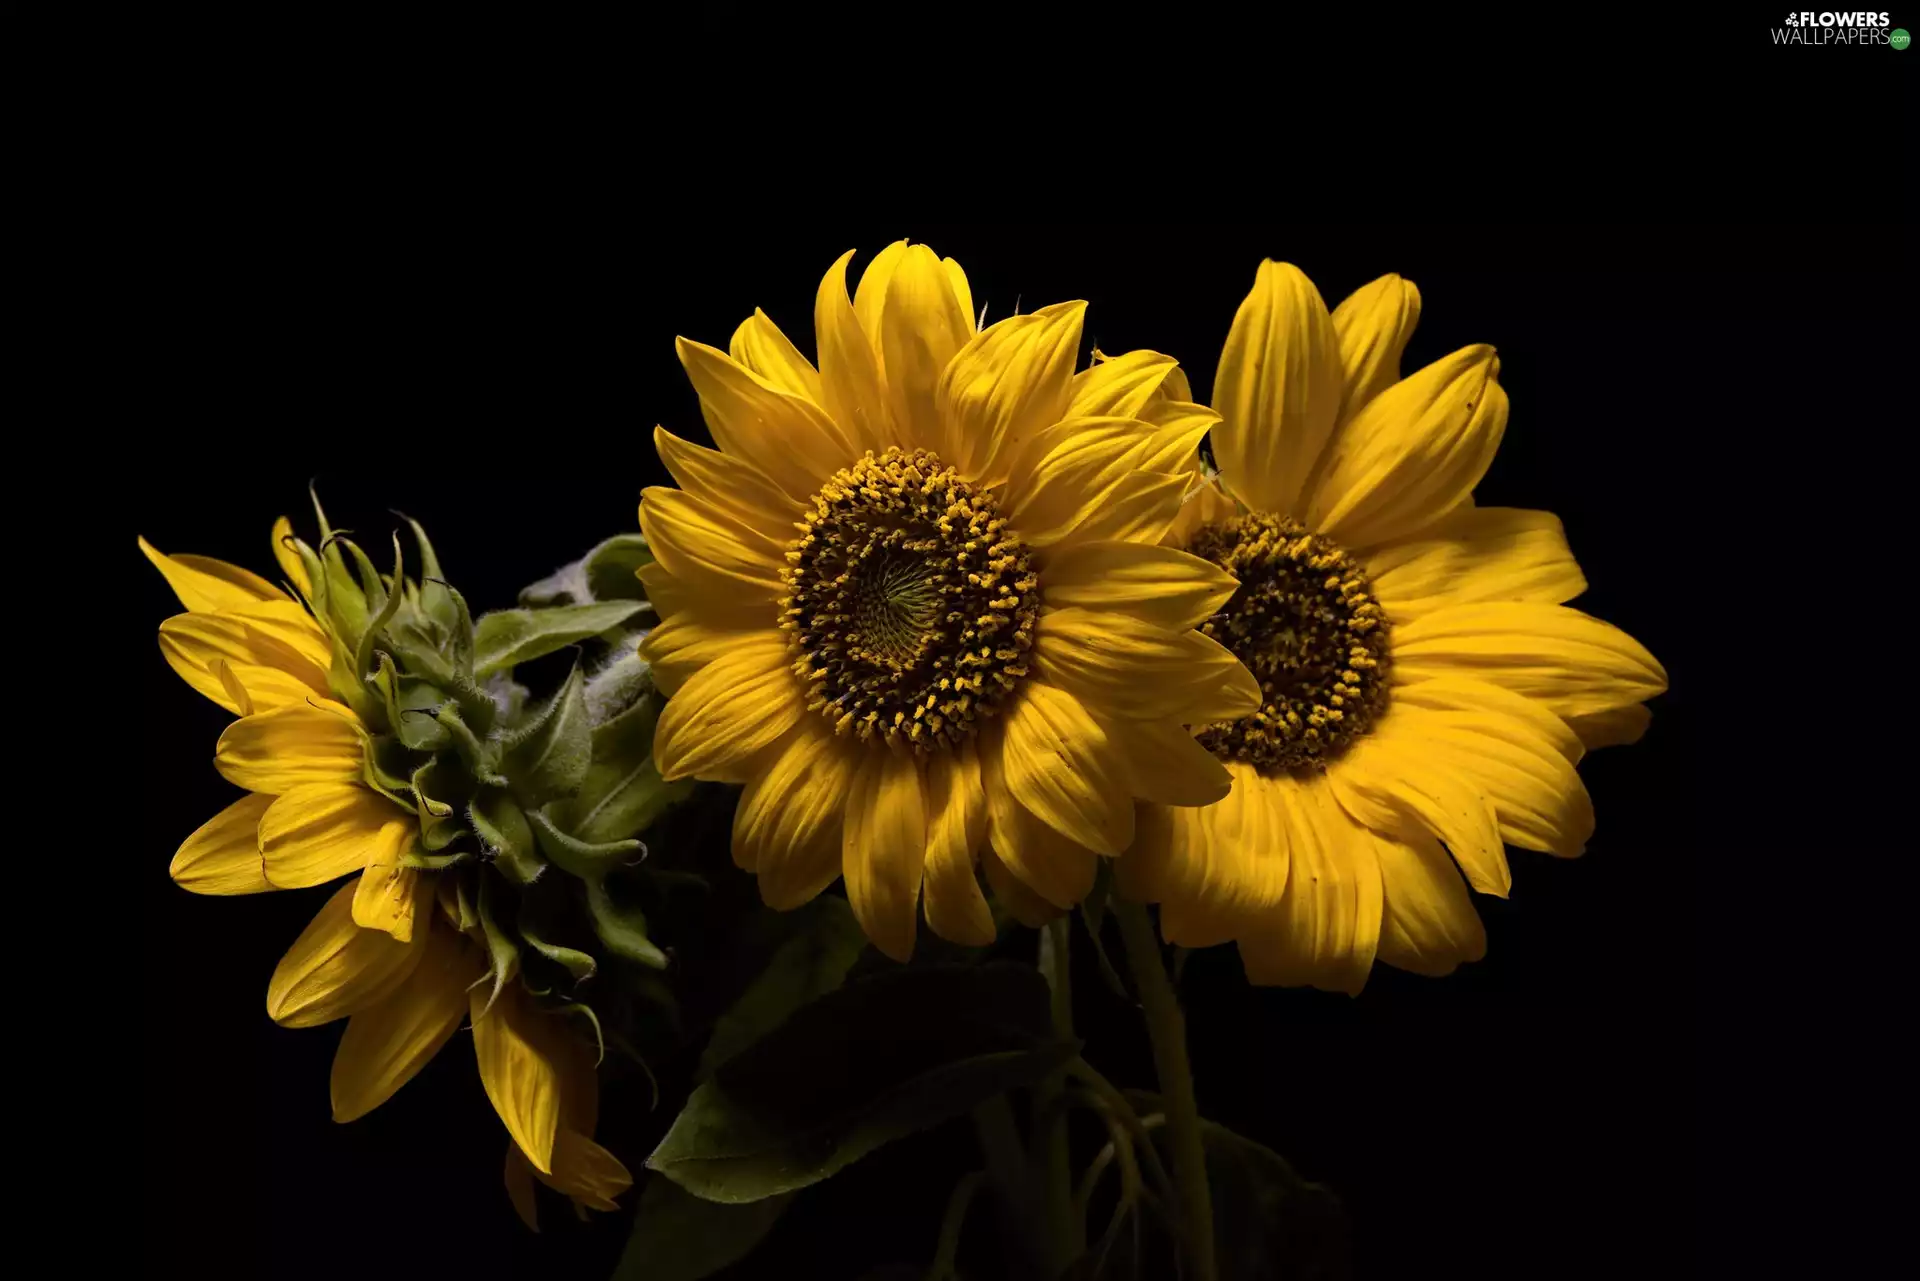 Three, Black, background, decorative Sunflowers - Flowers wallpapers